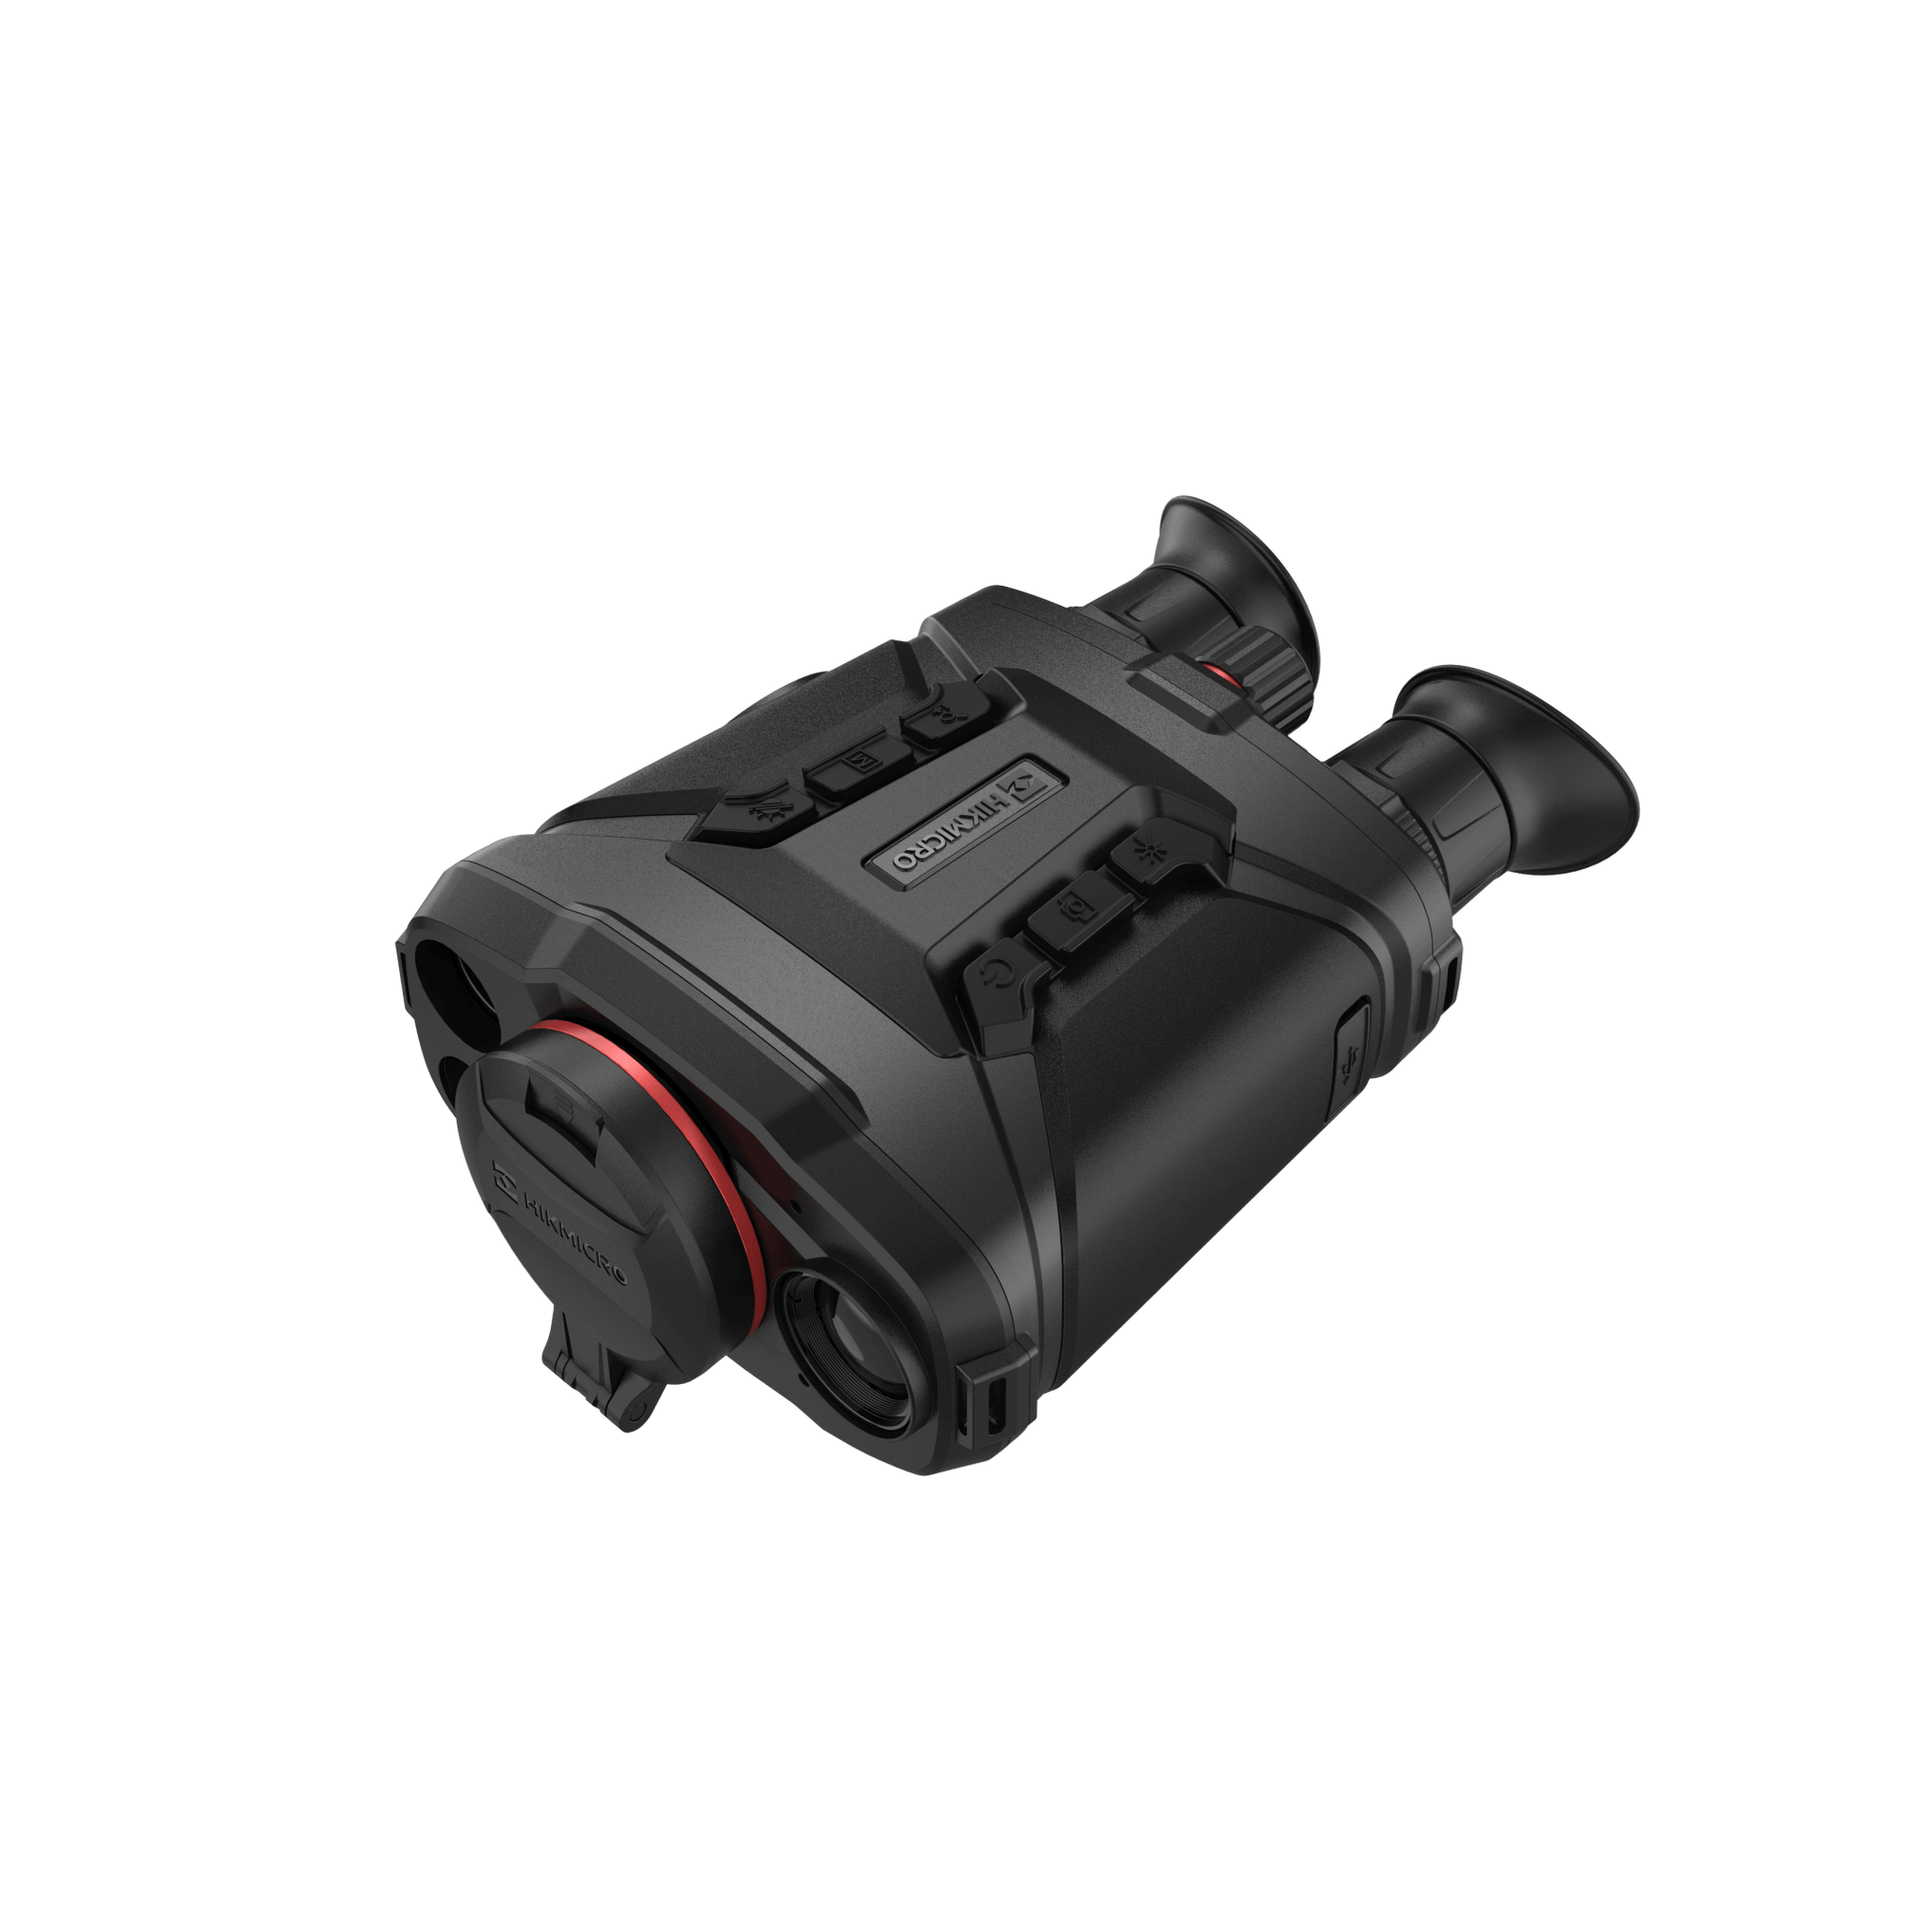 HikMicro Raptor RQ50 handheld thermal binocular with infrared and optical capabilities - Front Left View